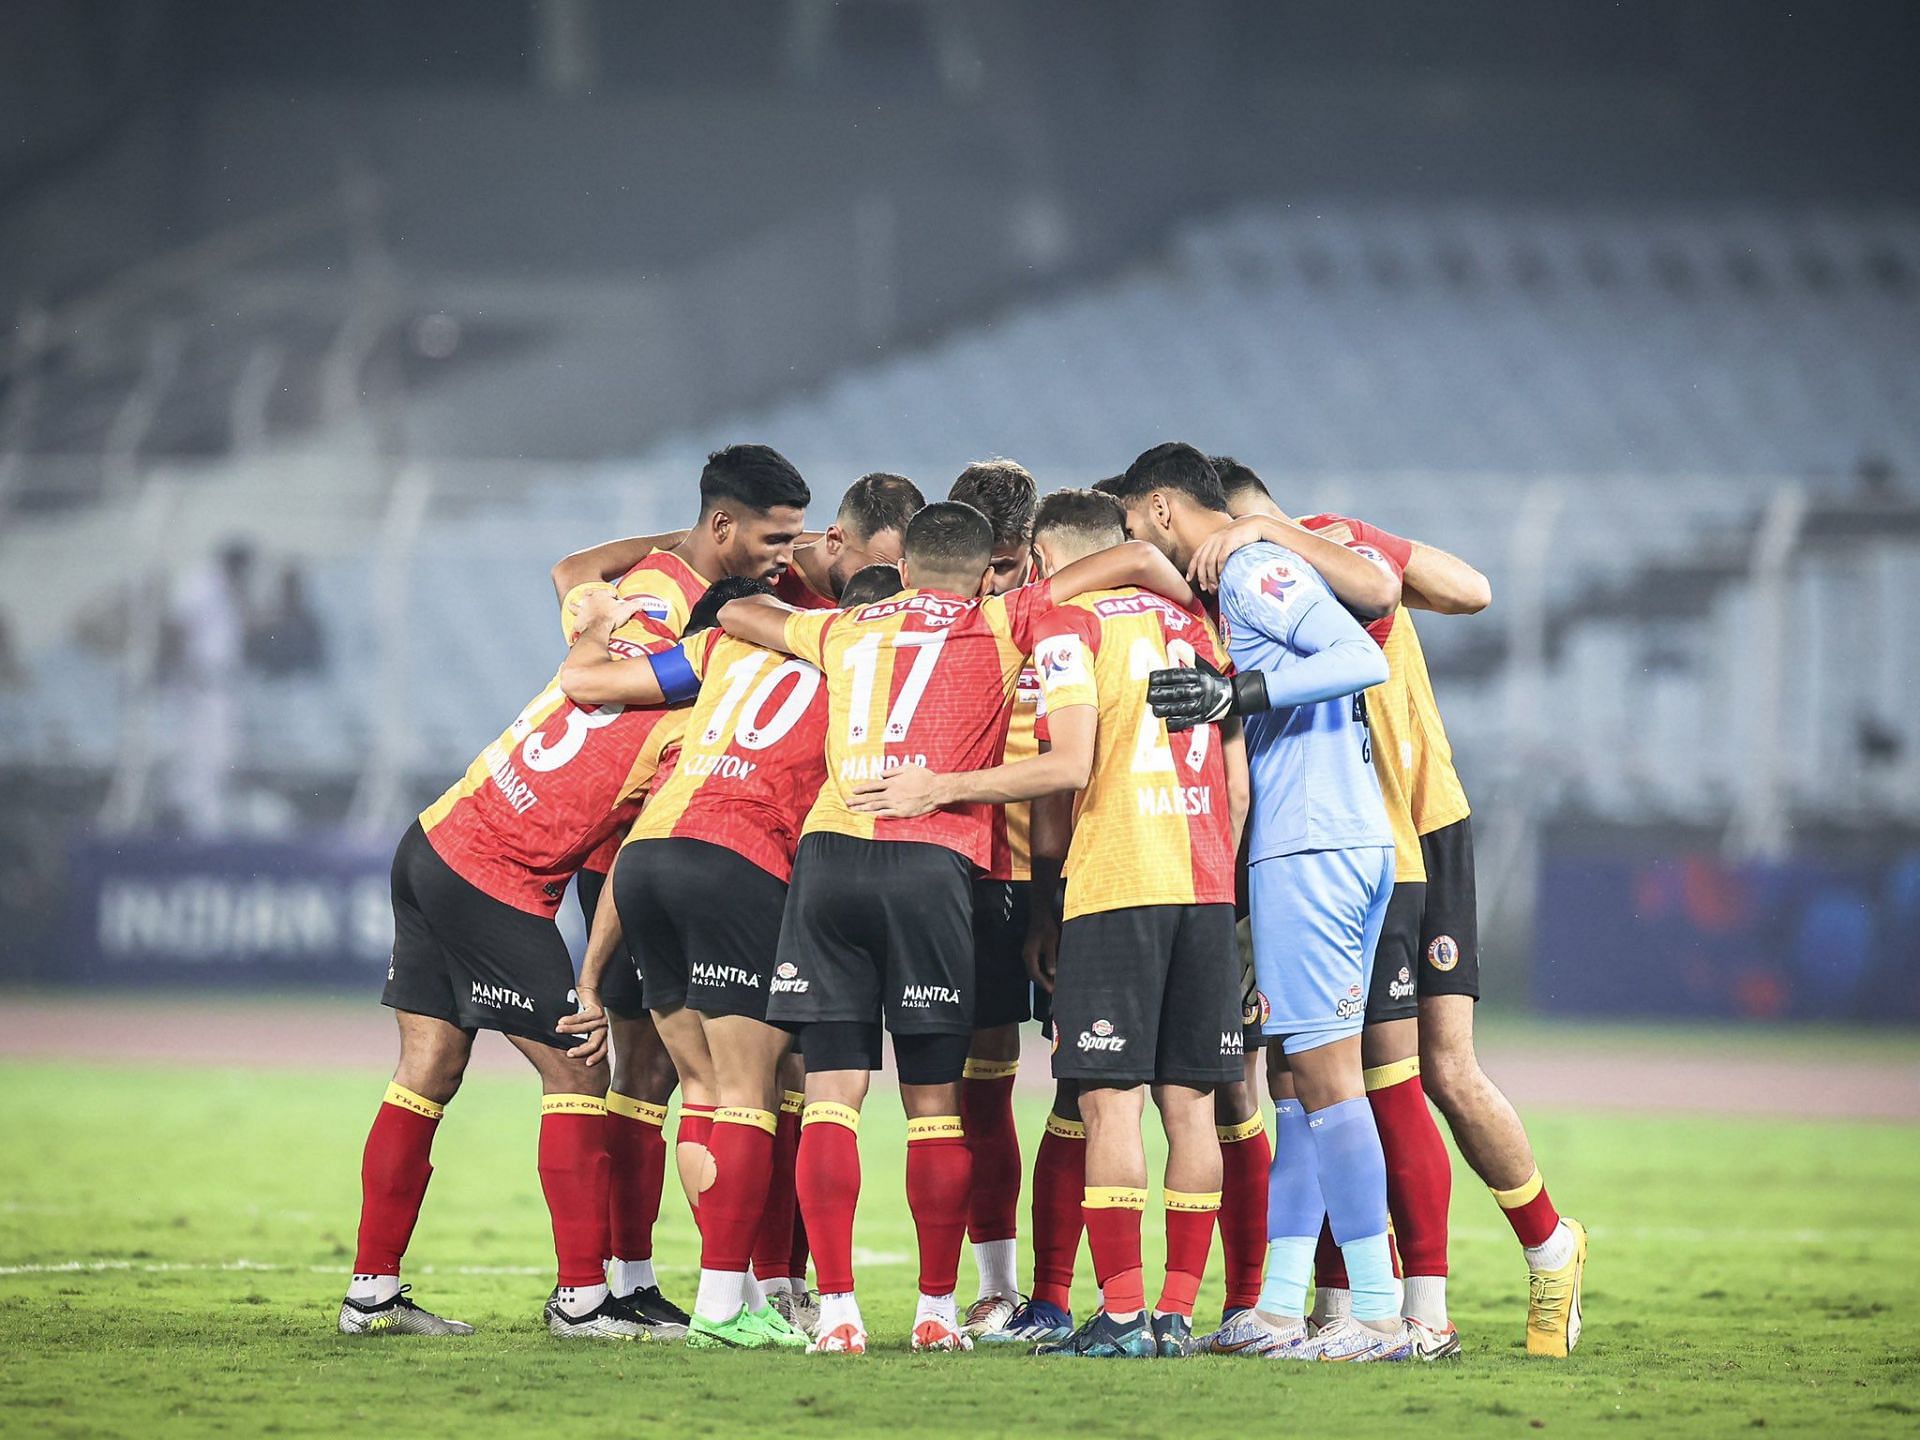 East Bengal FC registered their first-ever win over Chennaiyin FC only a few days back.